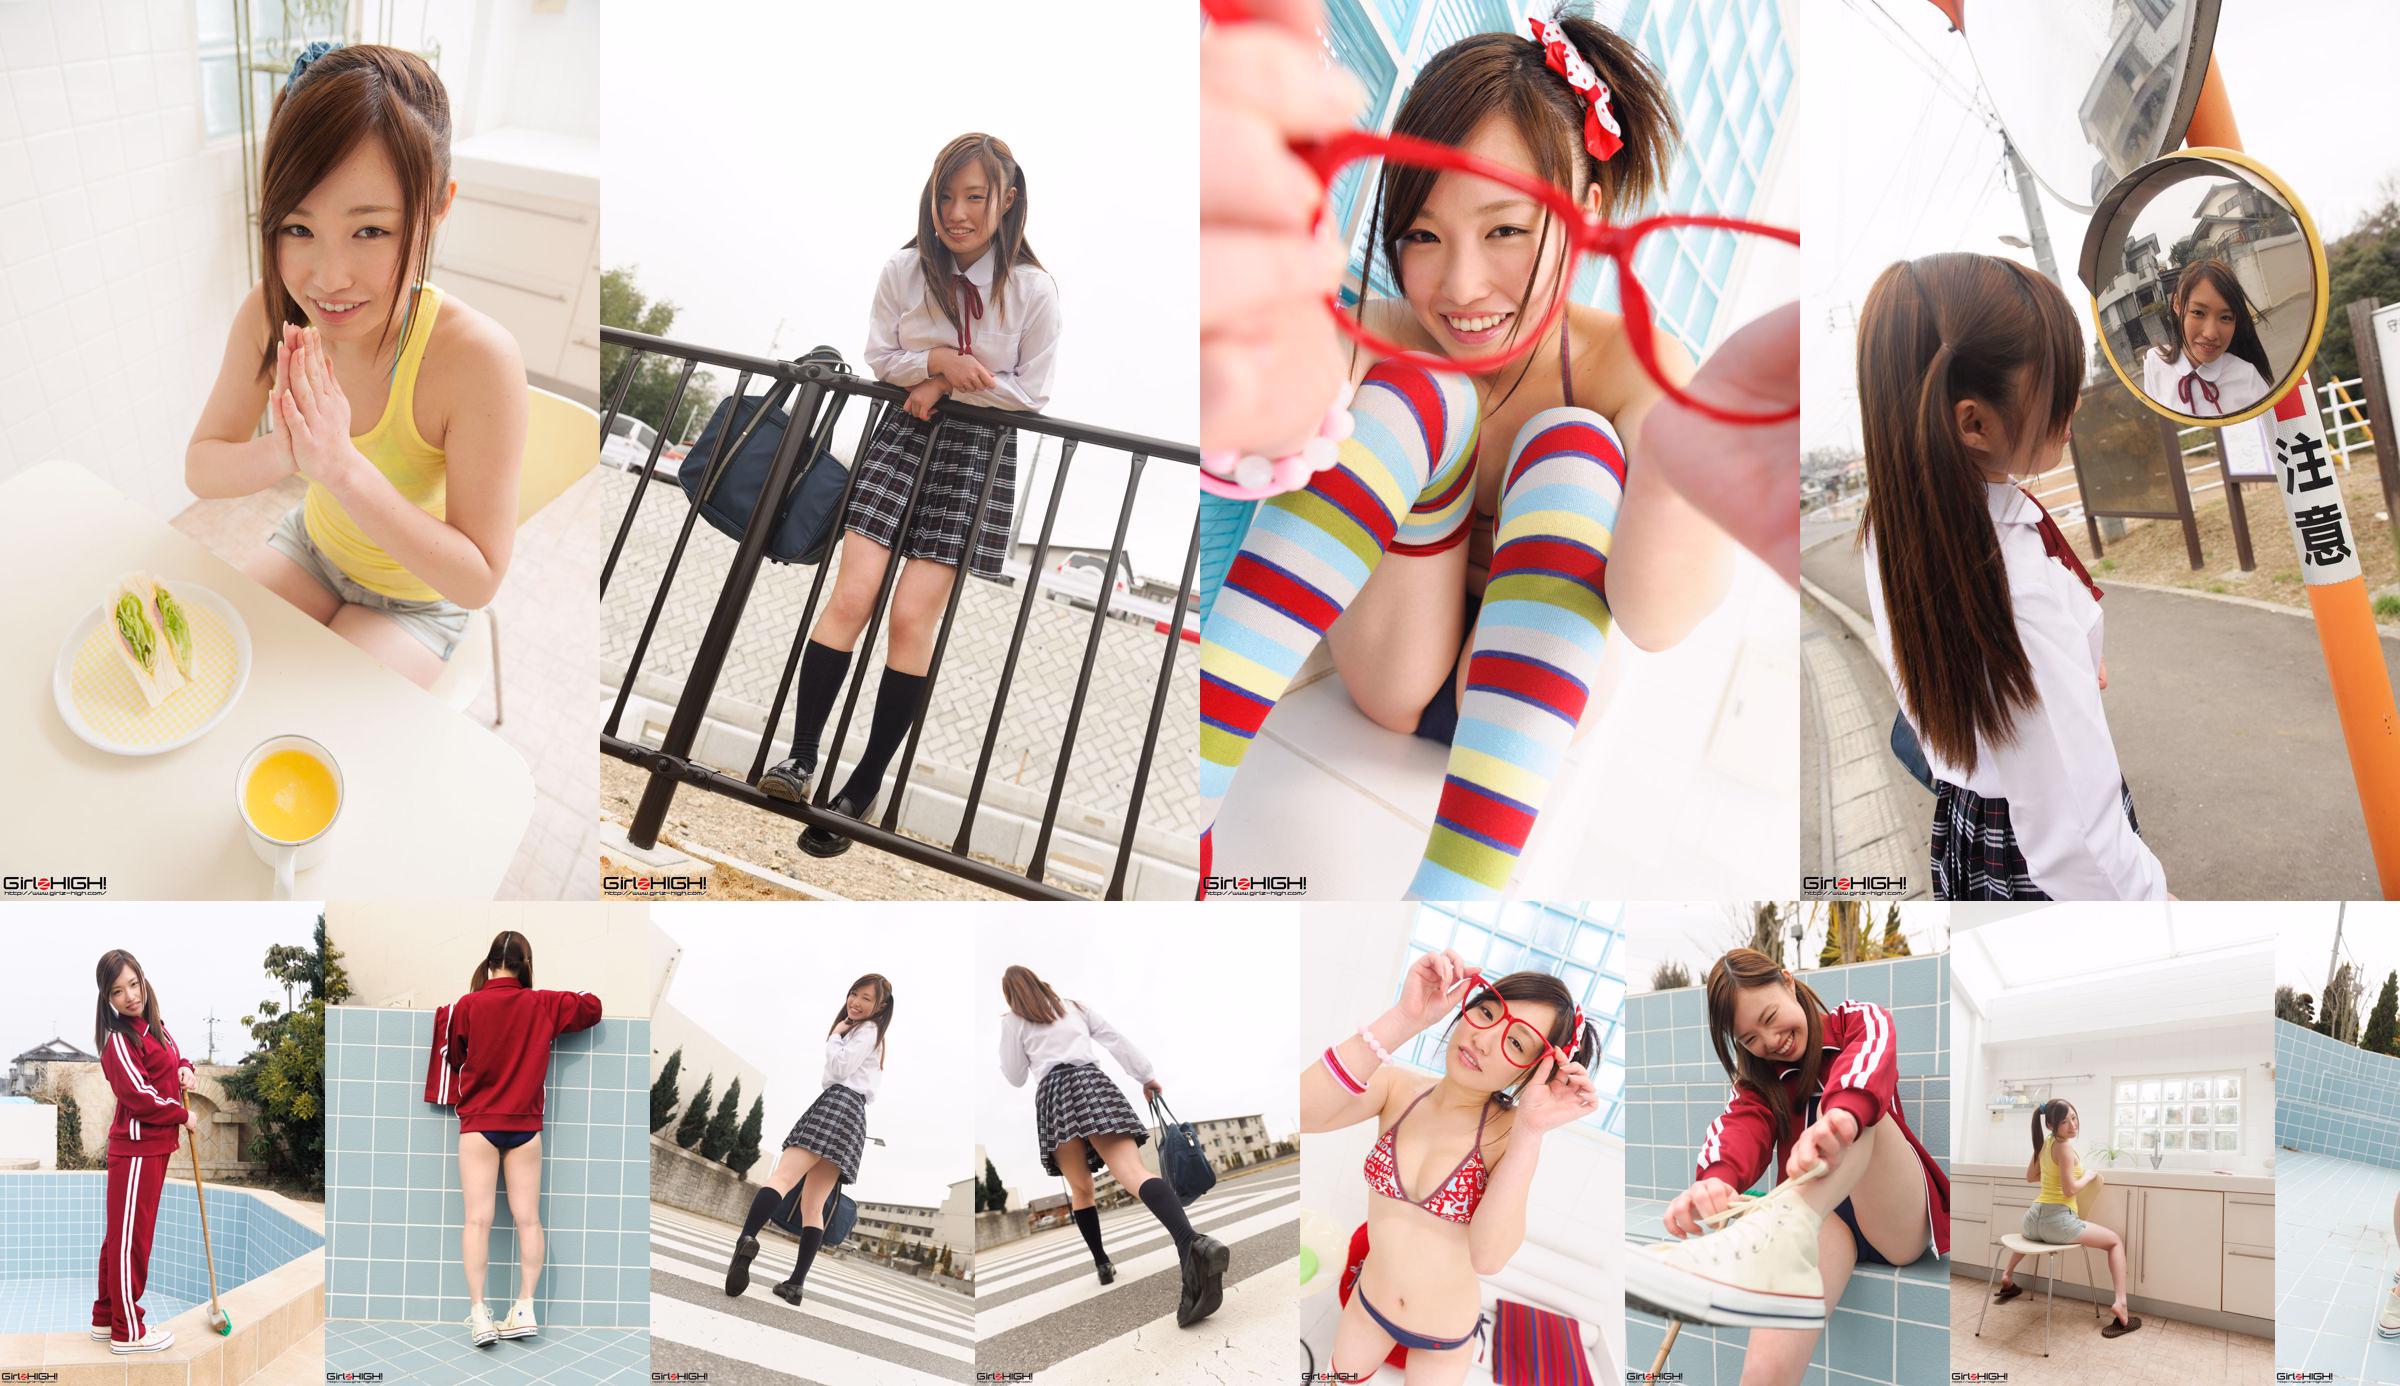 [Girlz-High] Yuno Natsuki Yuno Natsuki / Yuno Natsuki Gravure Gallery-g023 Photoset 03 No.c1a340 Page 3